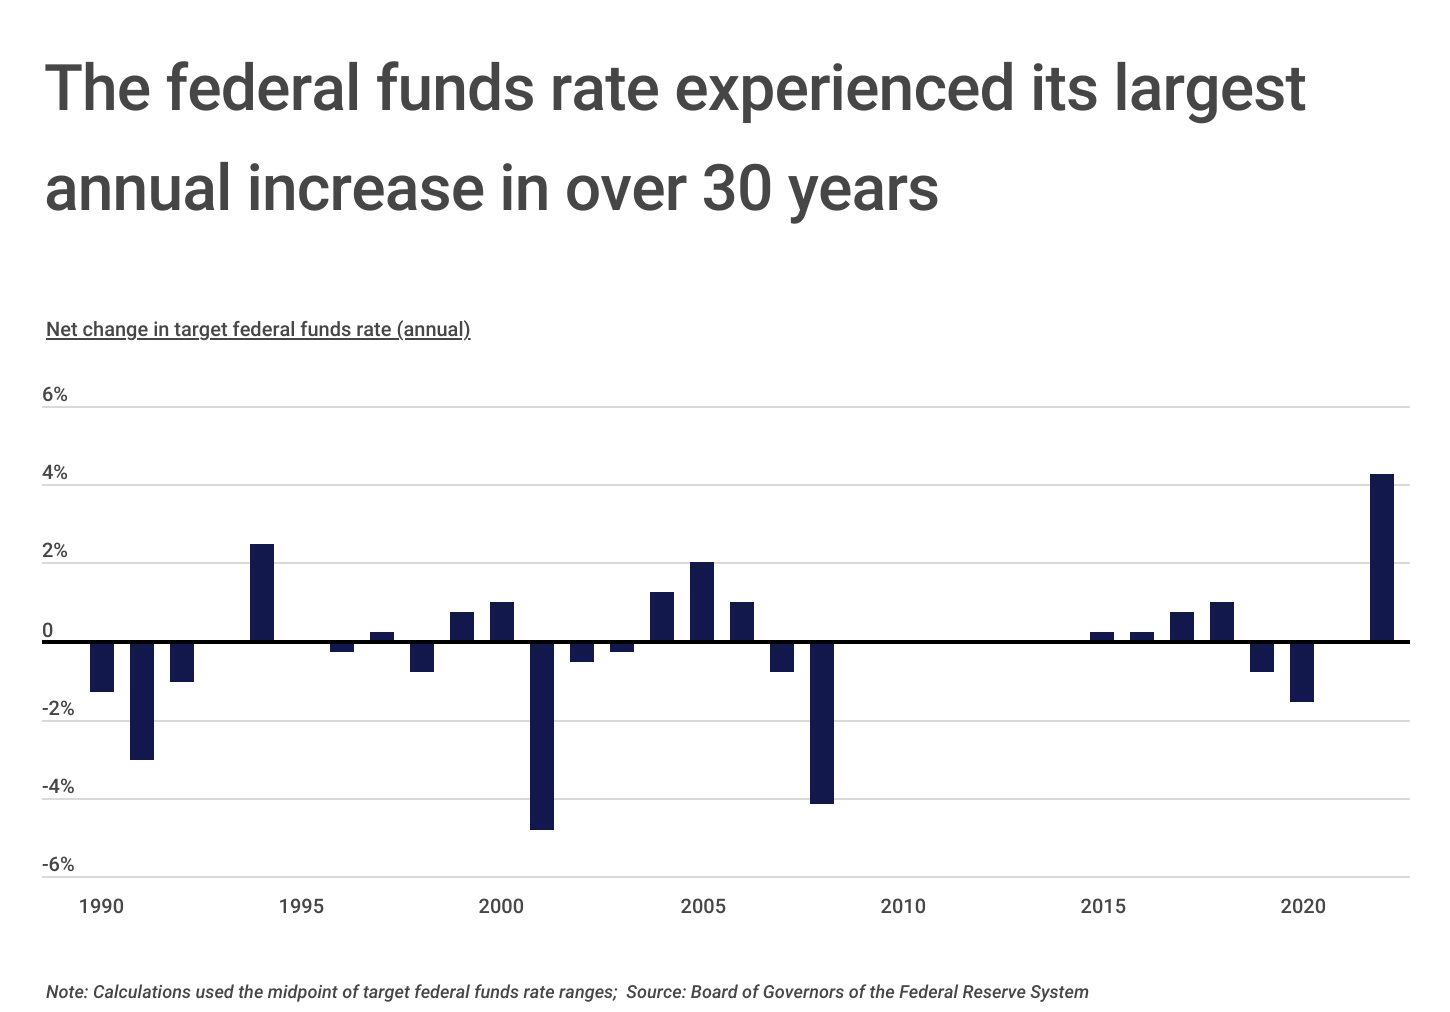 Chart1_The federal funds rate saw its largest annual increase in 30+ years